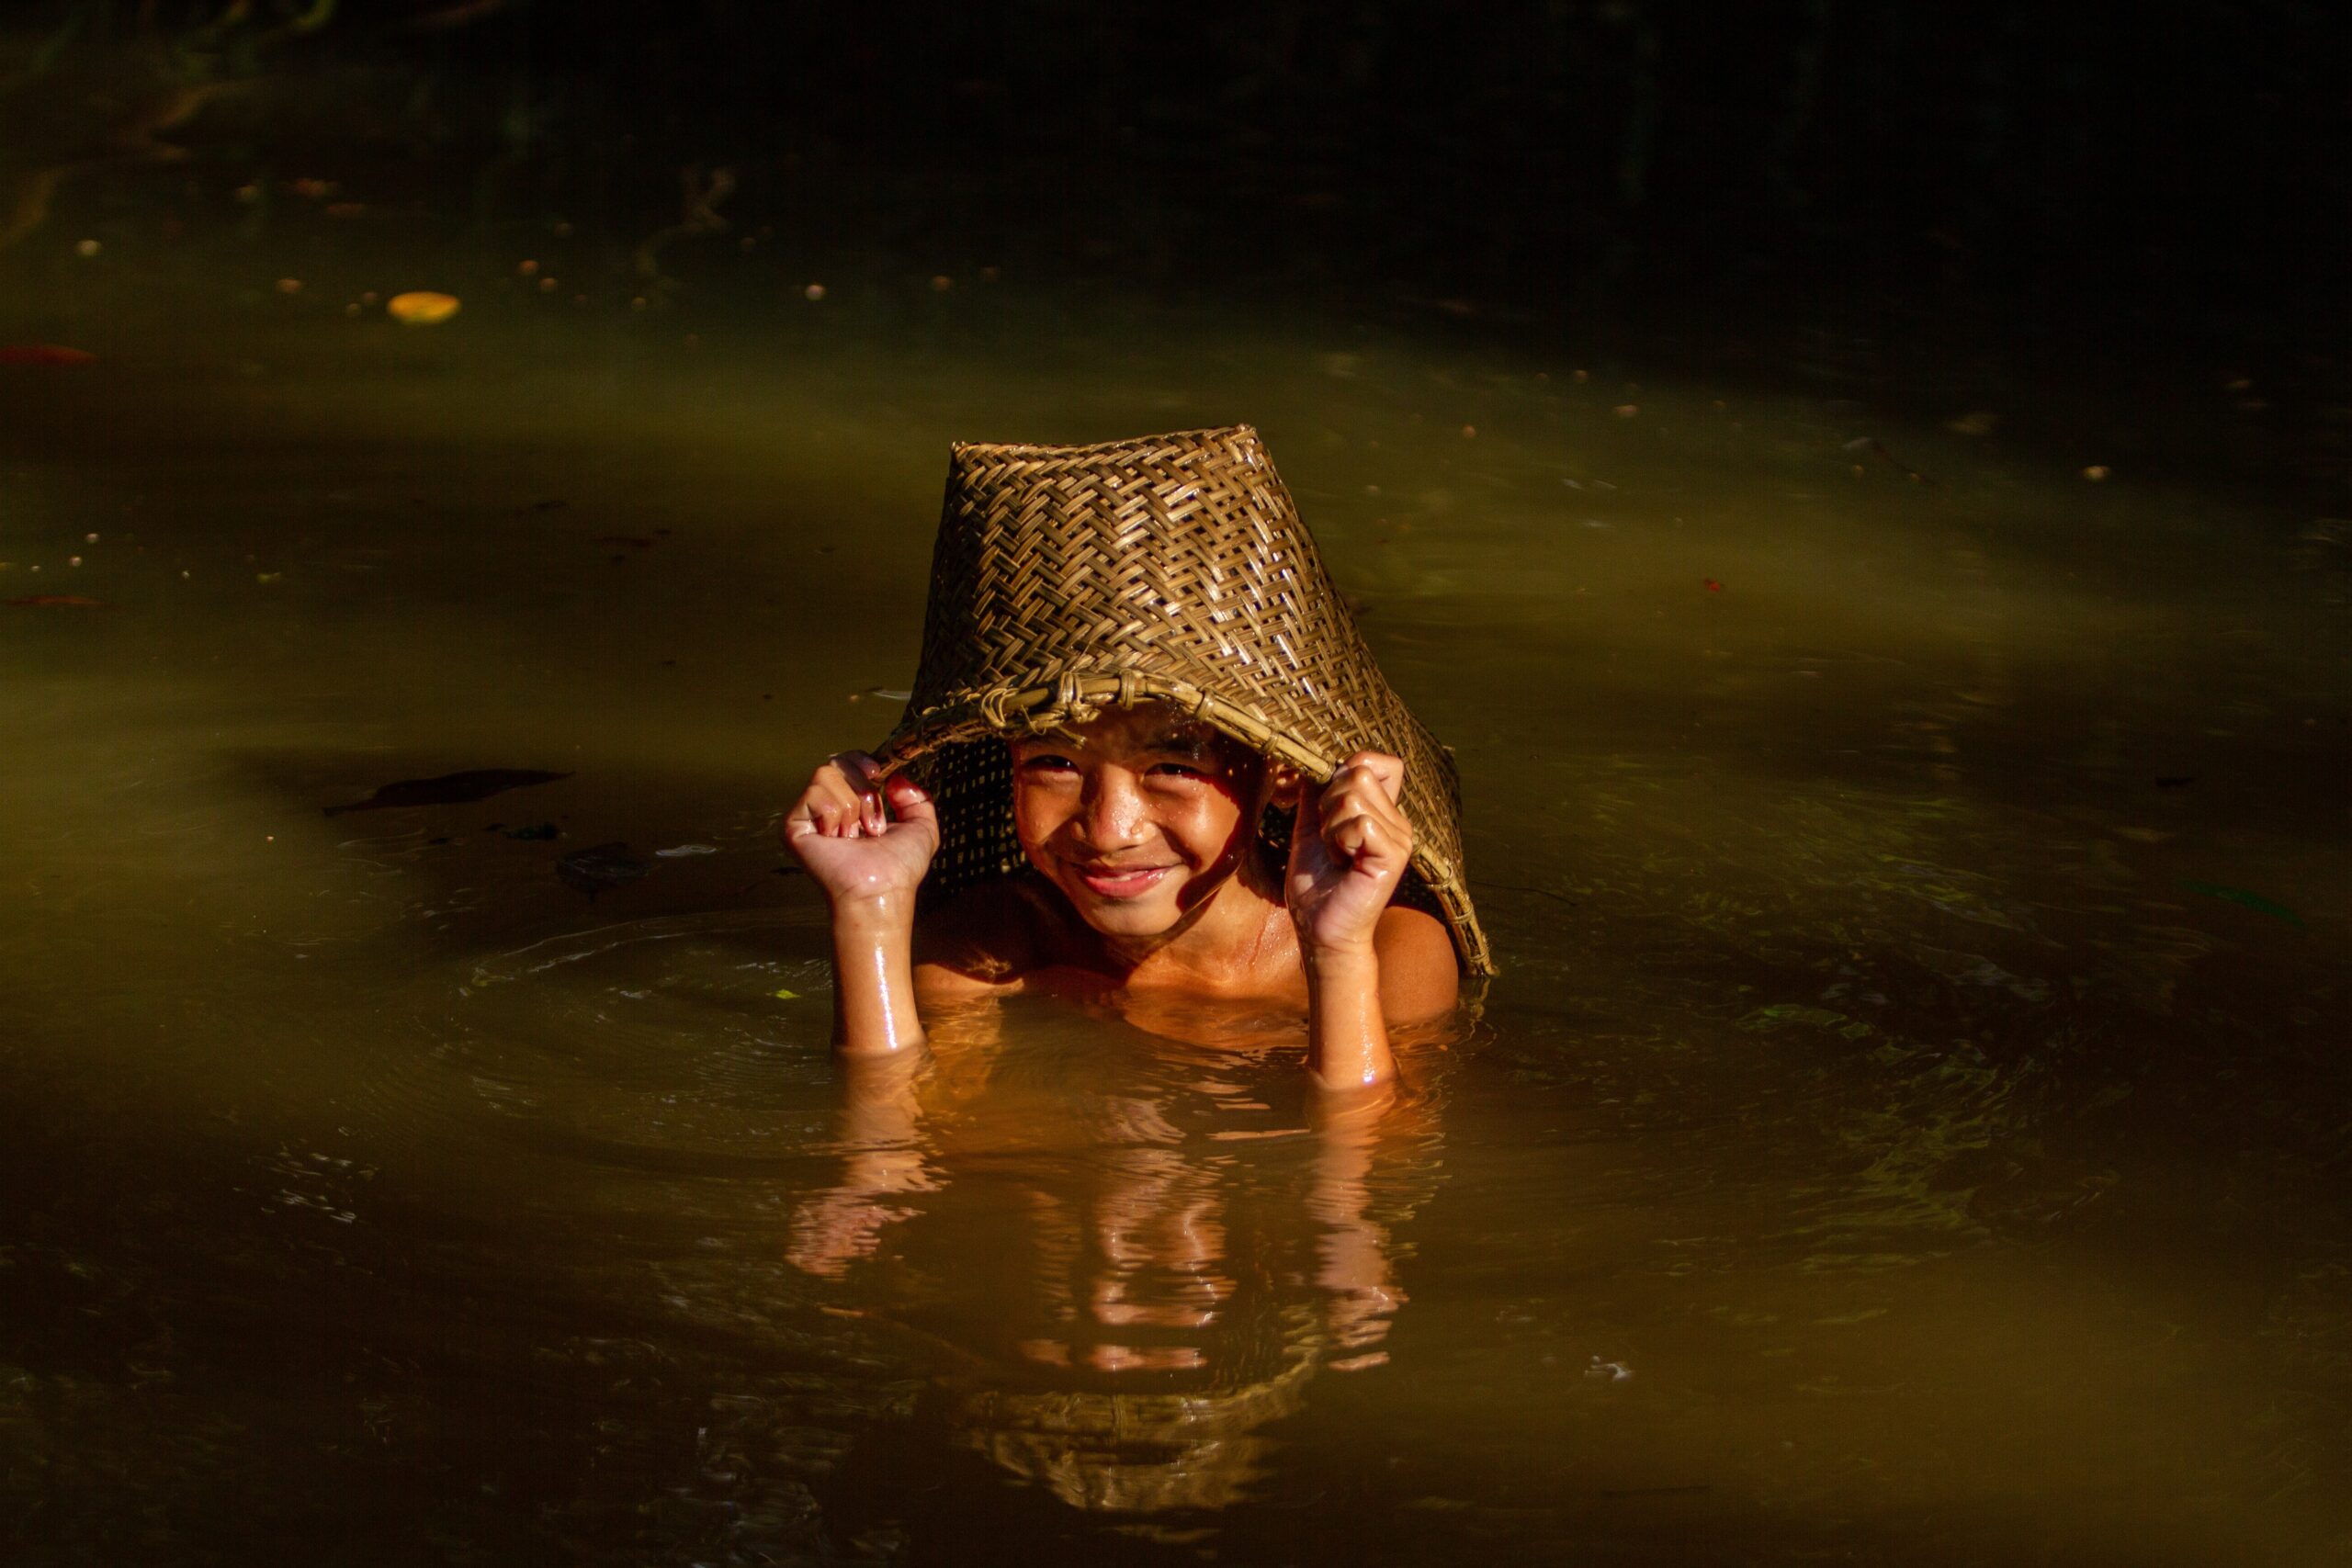 Child from the Dayak Kebhan people of Indonesia playing in the river. 
The “Indigenous Innovative Solutions” Photography Contest Winners
Photo Name: Dayak Kebhan Children. Author: Victor Fidelis Sentosa